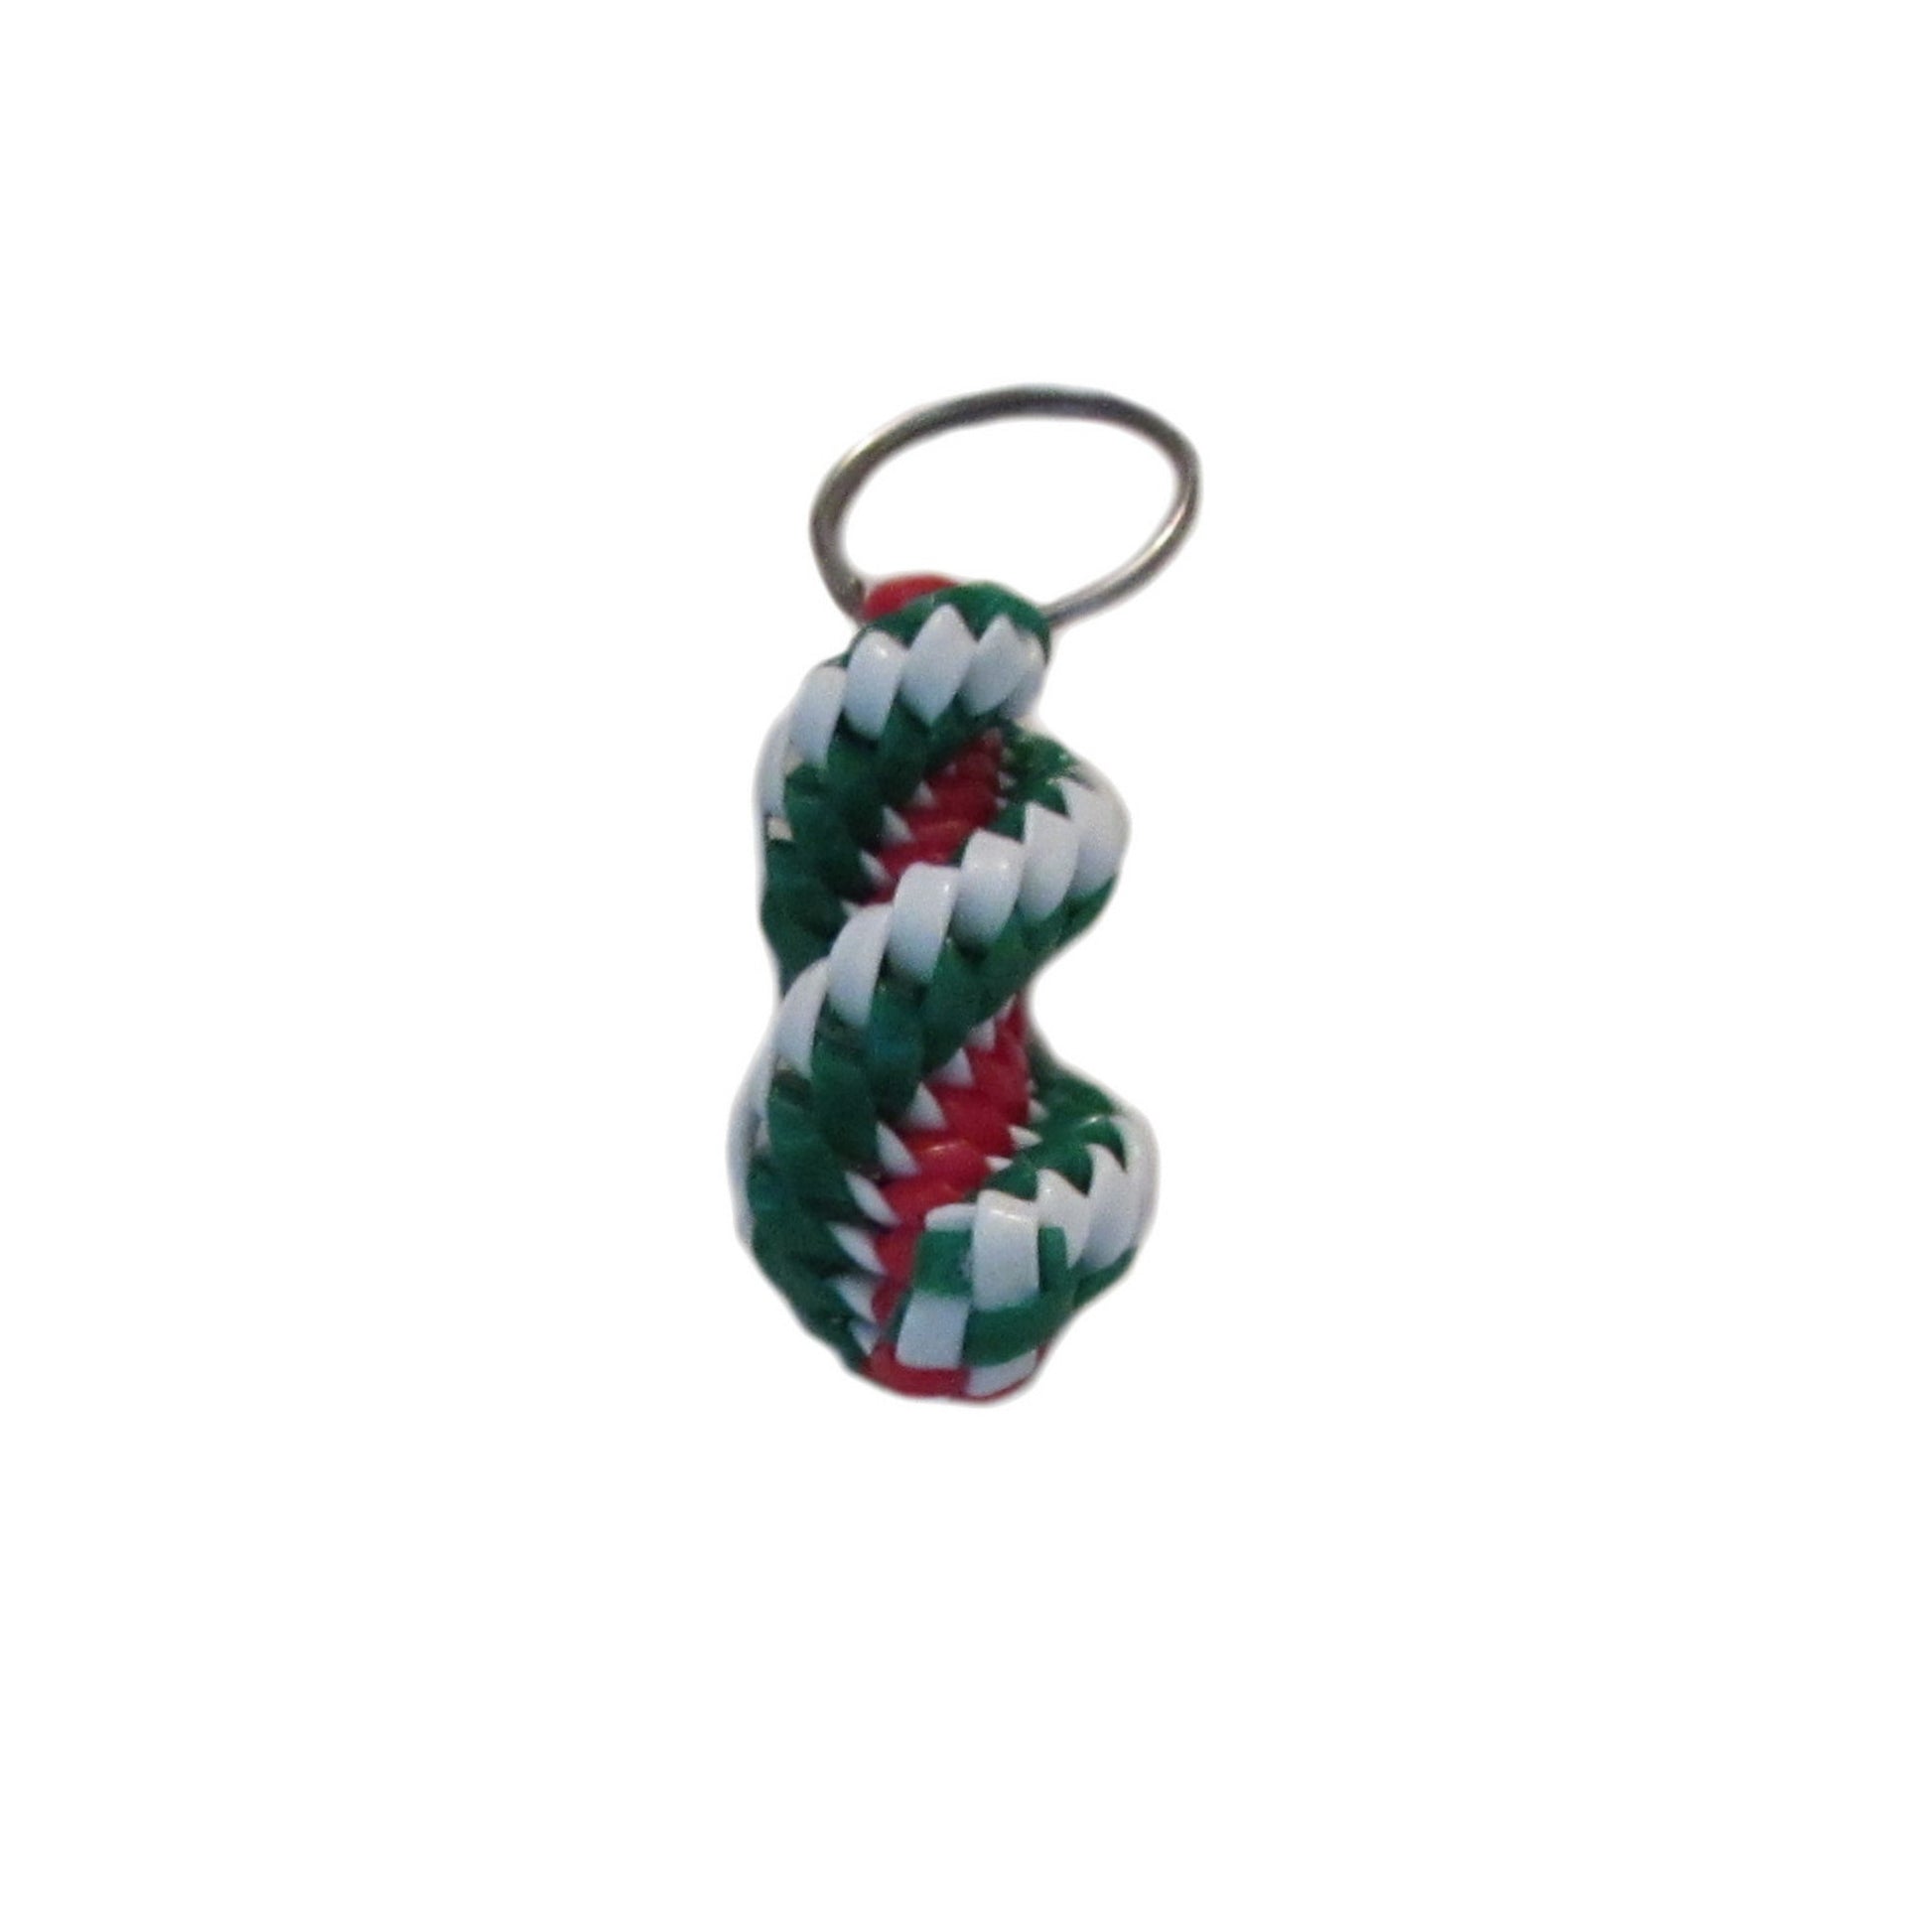 Small Red Green White Plastic Lacing Key Chain